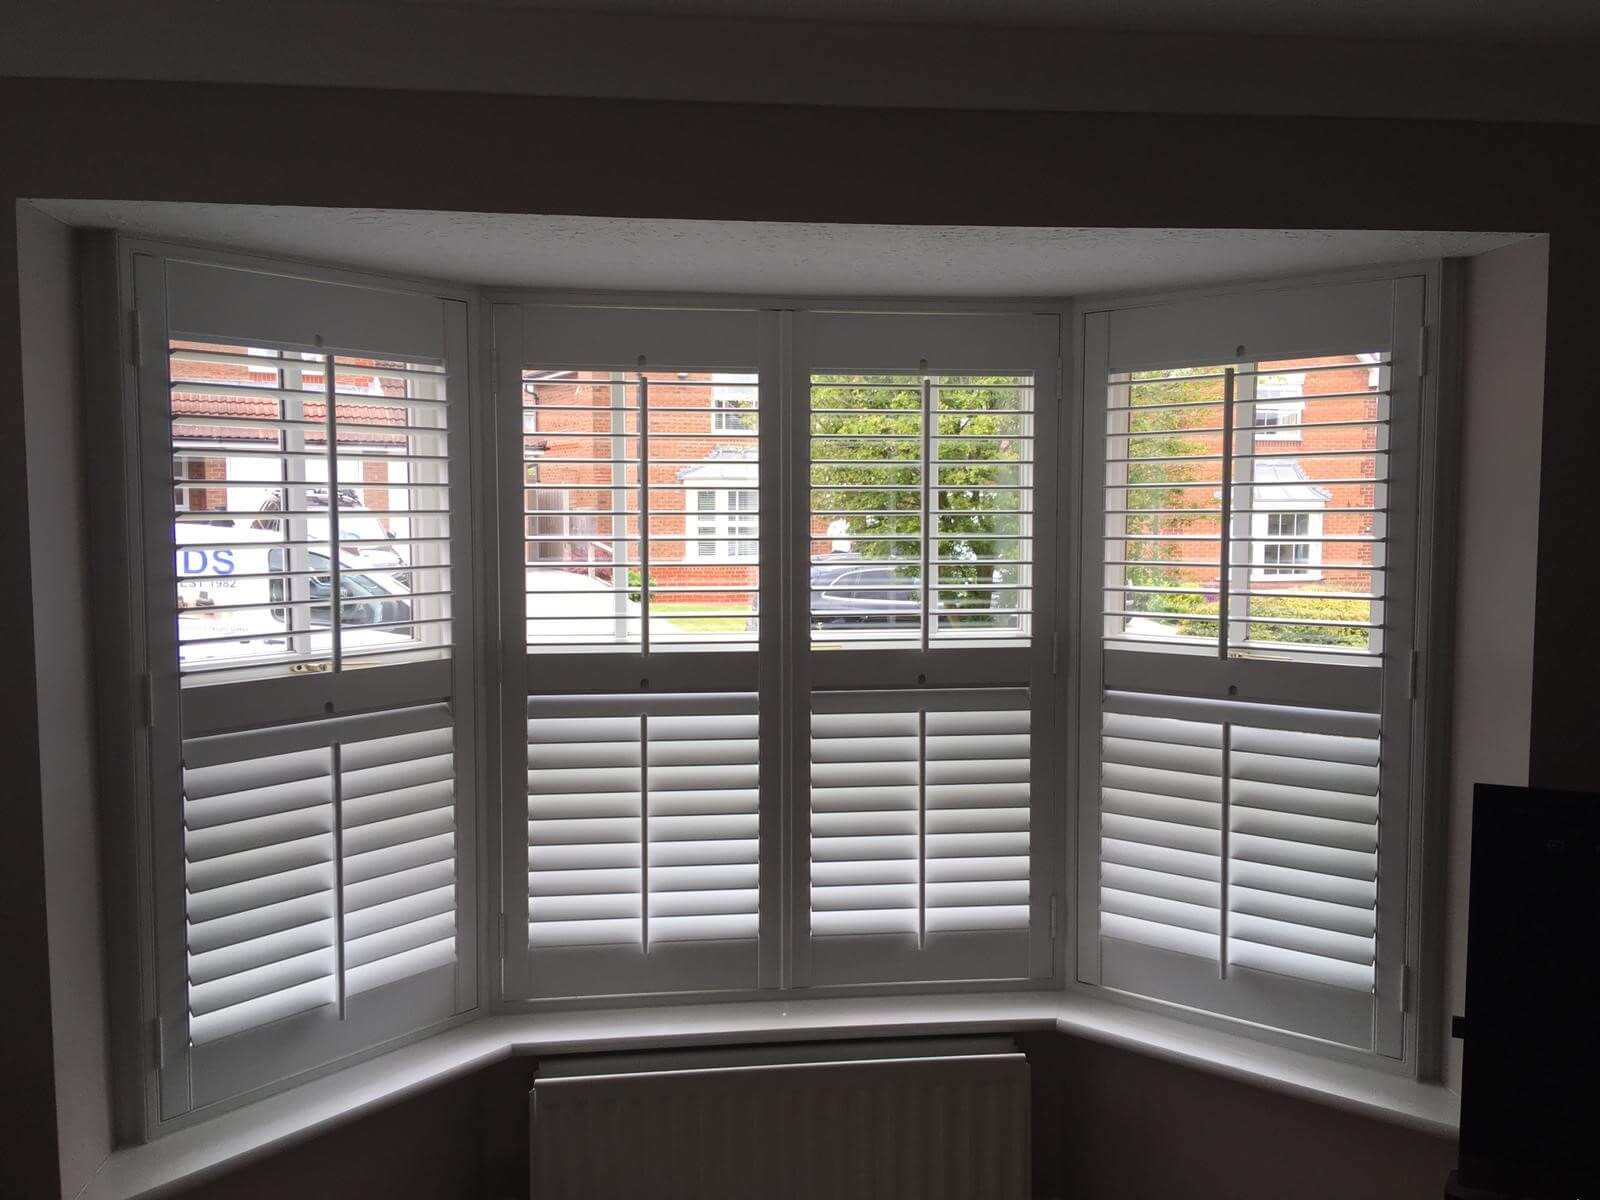 UK Suppliers of Waterproof Plantation Shutters For Bathrooms